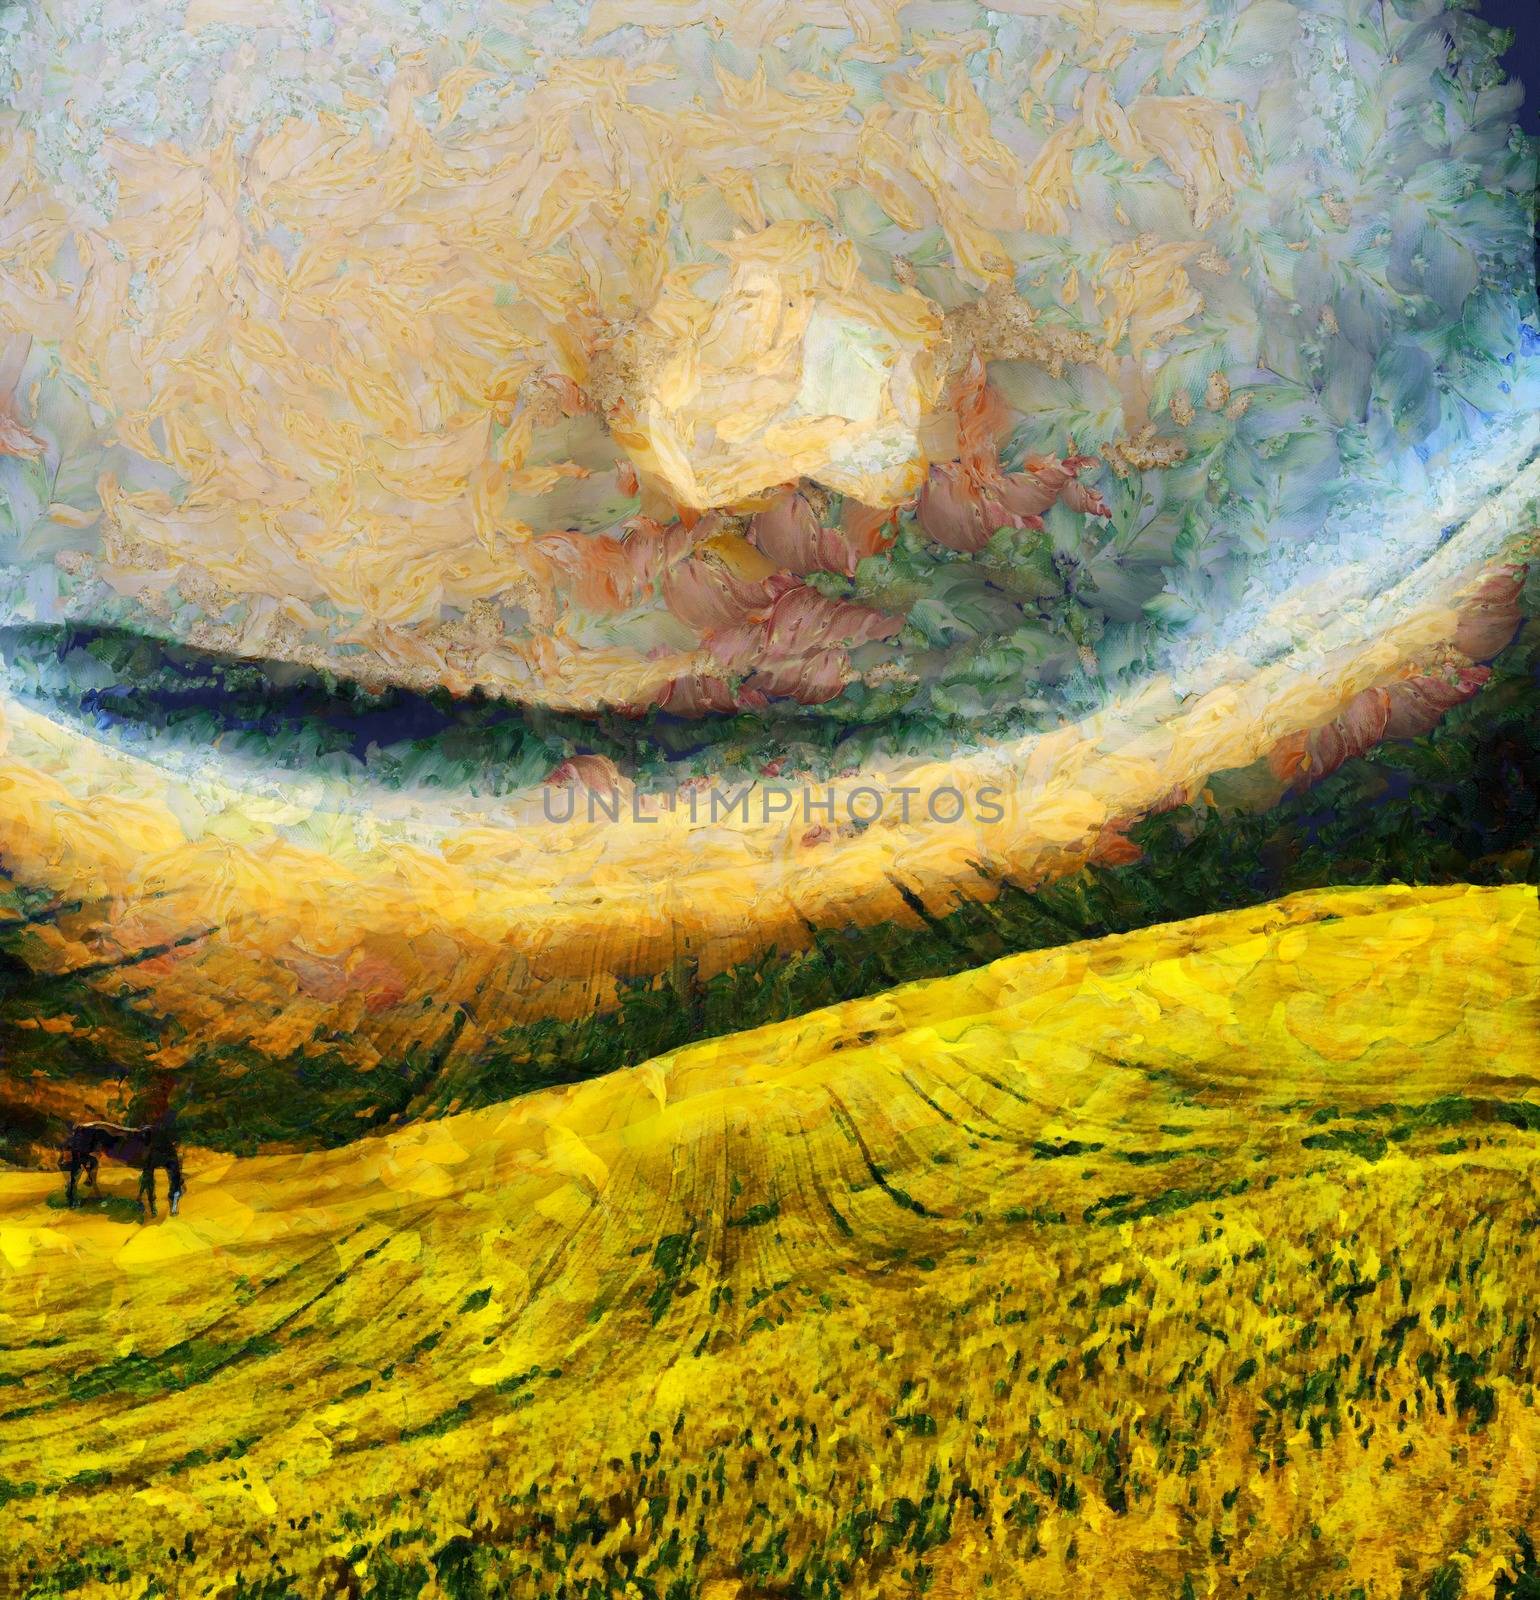 Oil painting. Horse in the field. Yellow moon rise over mountain.